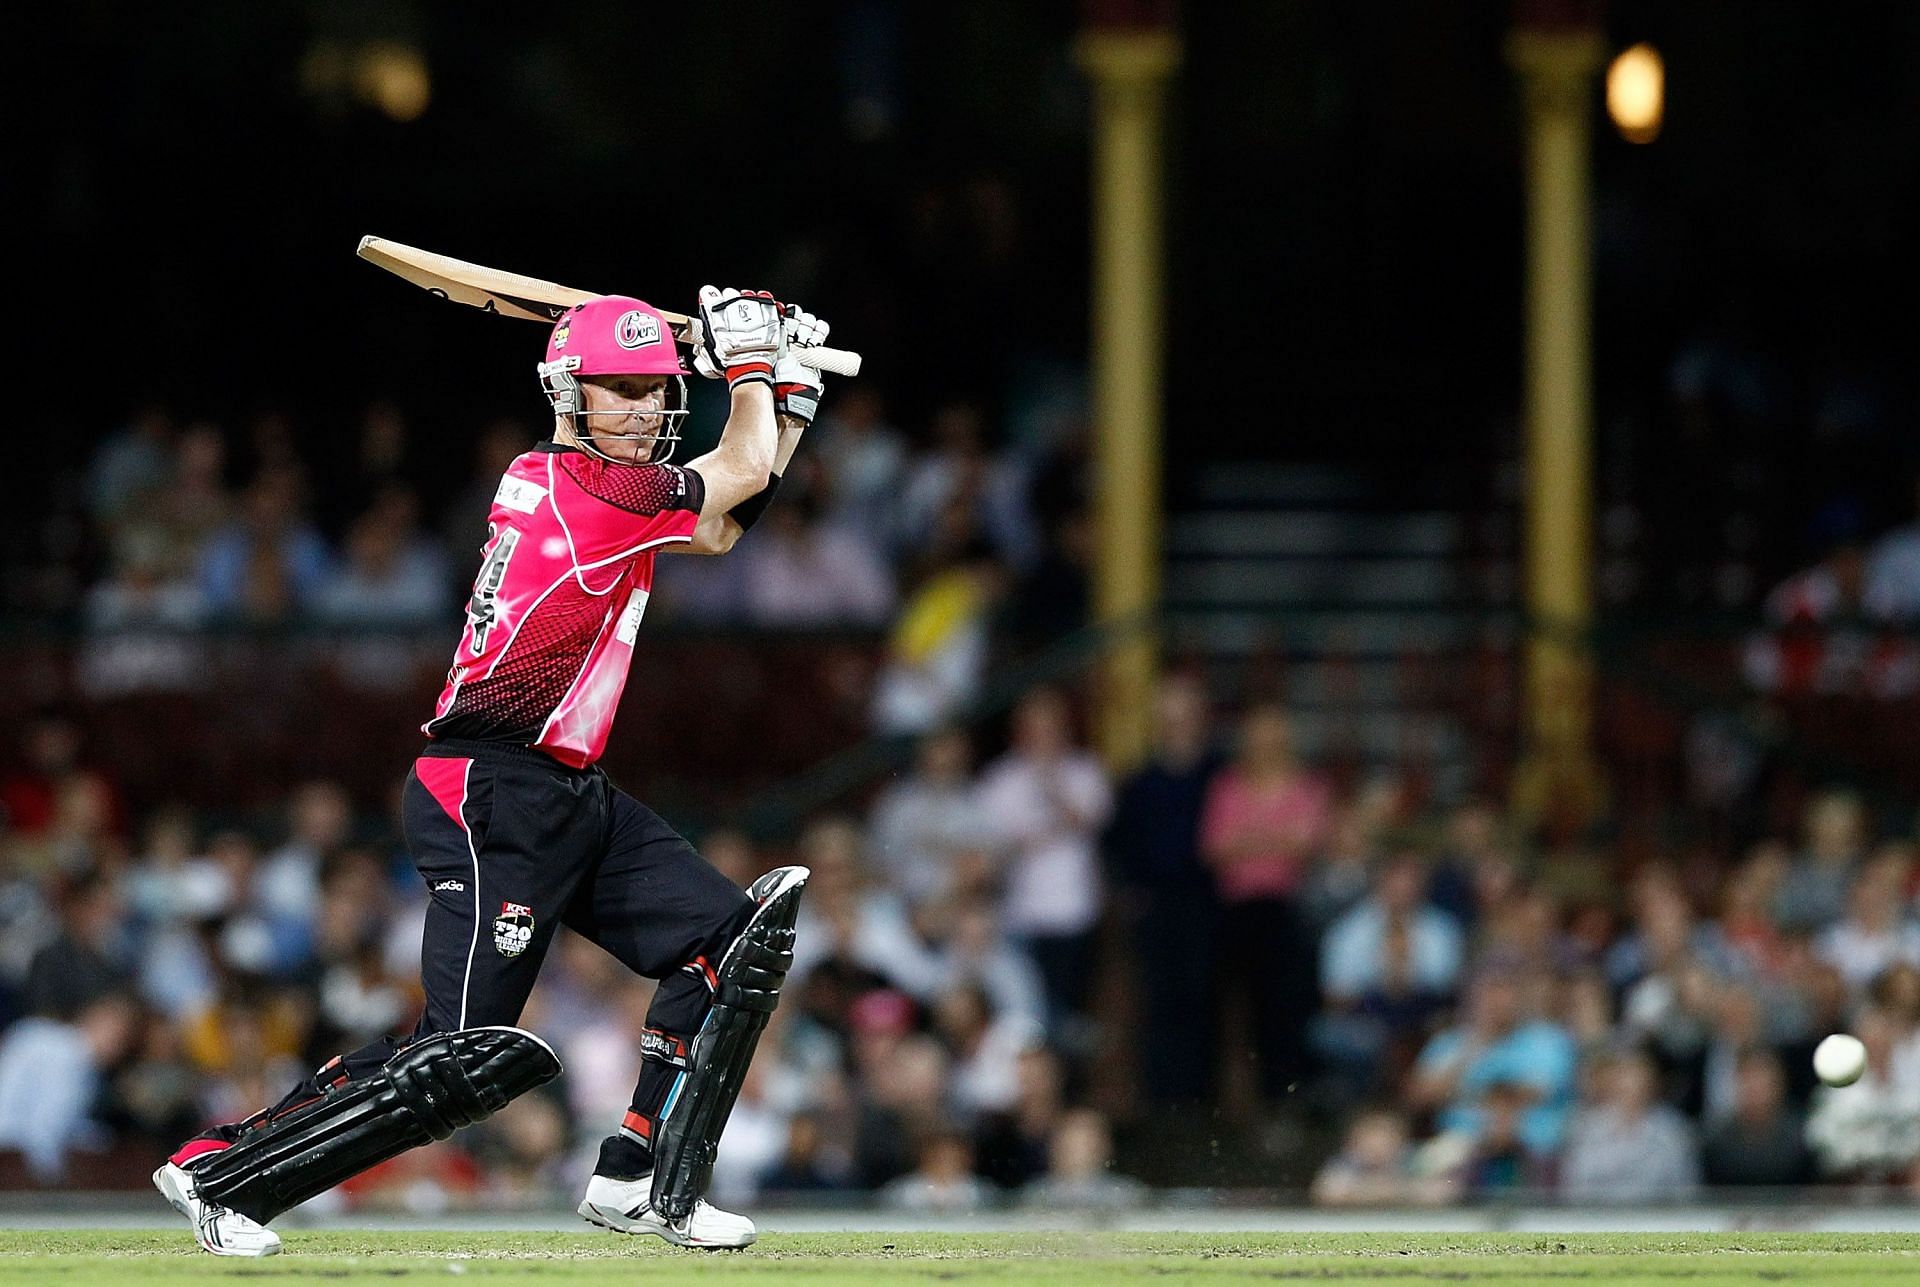 Brad Haddin of the Sixers bats during the T20 Big Bash League. Pic: Getty Images